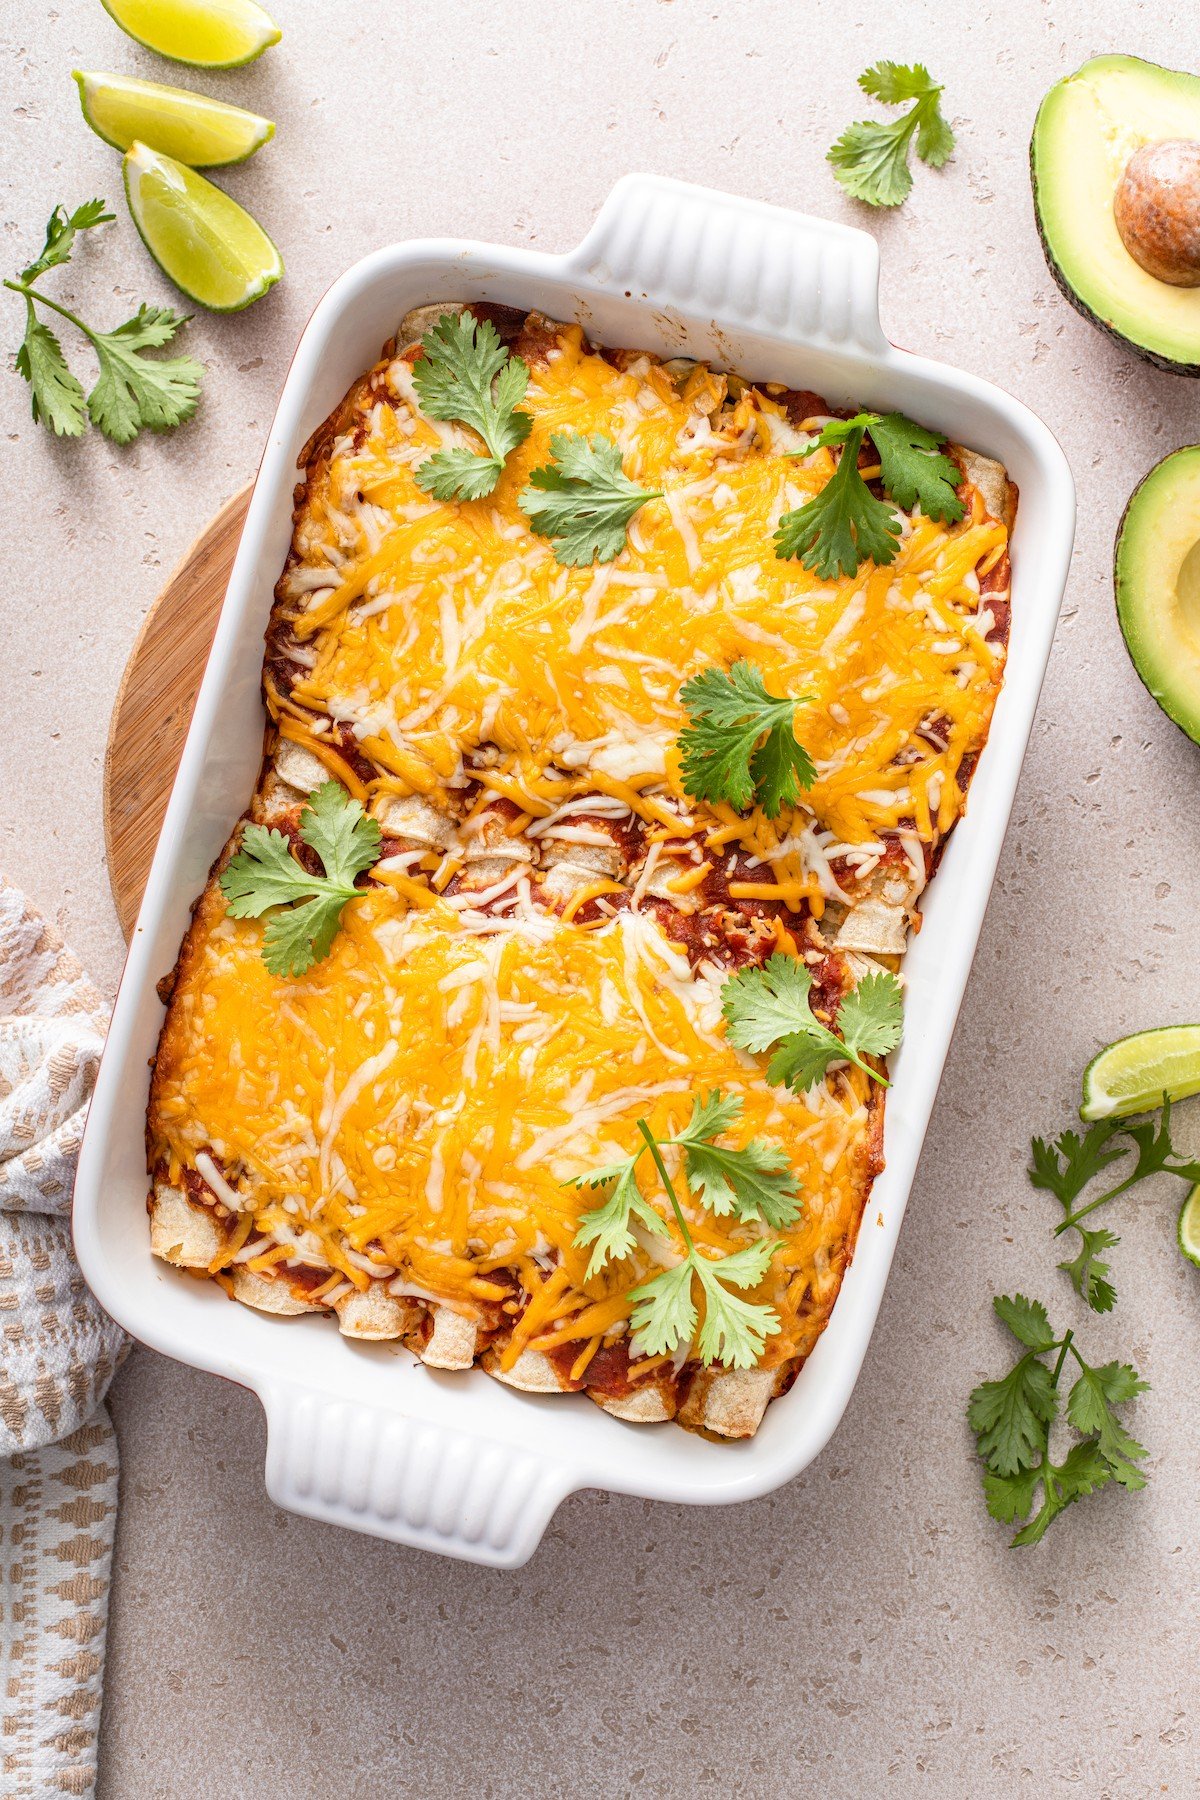 Overhead view of a baking dish of vegetarian enchiladas